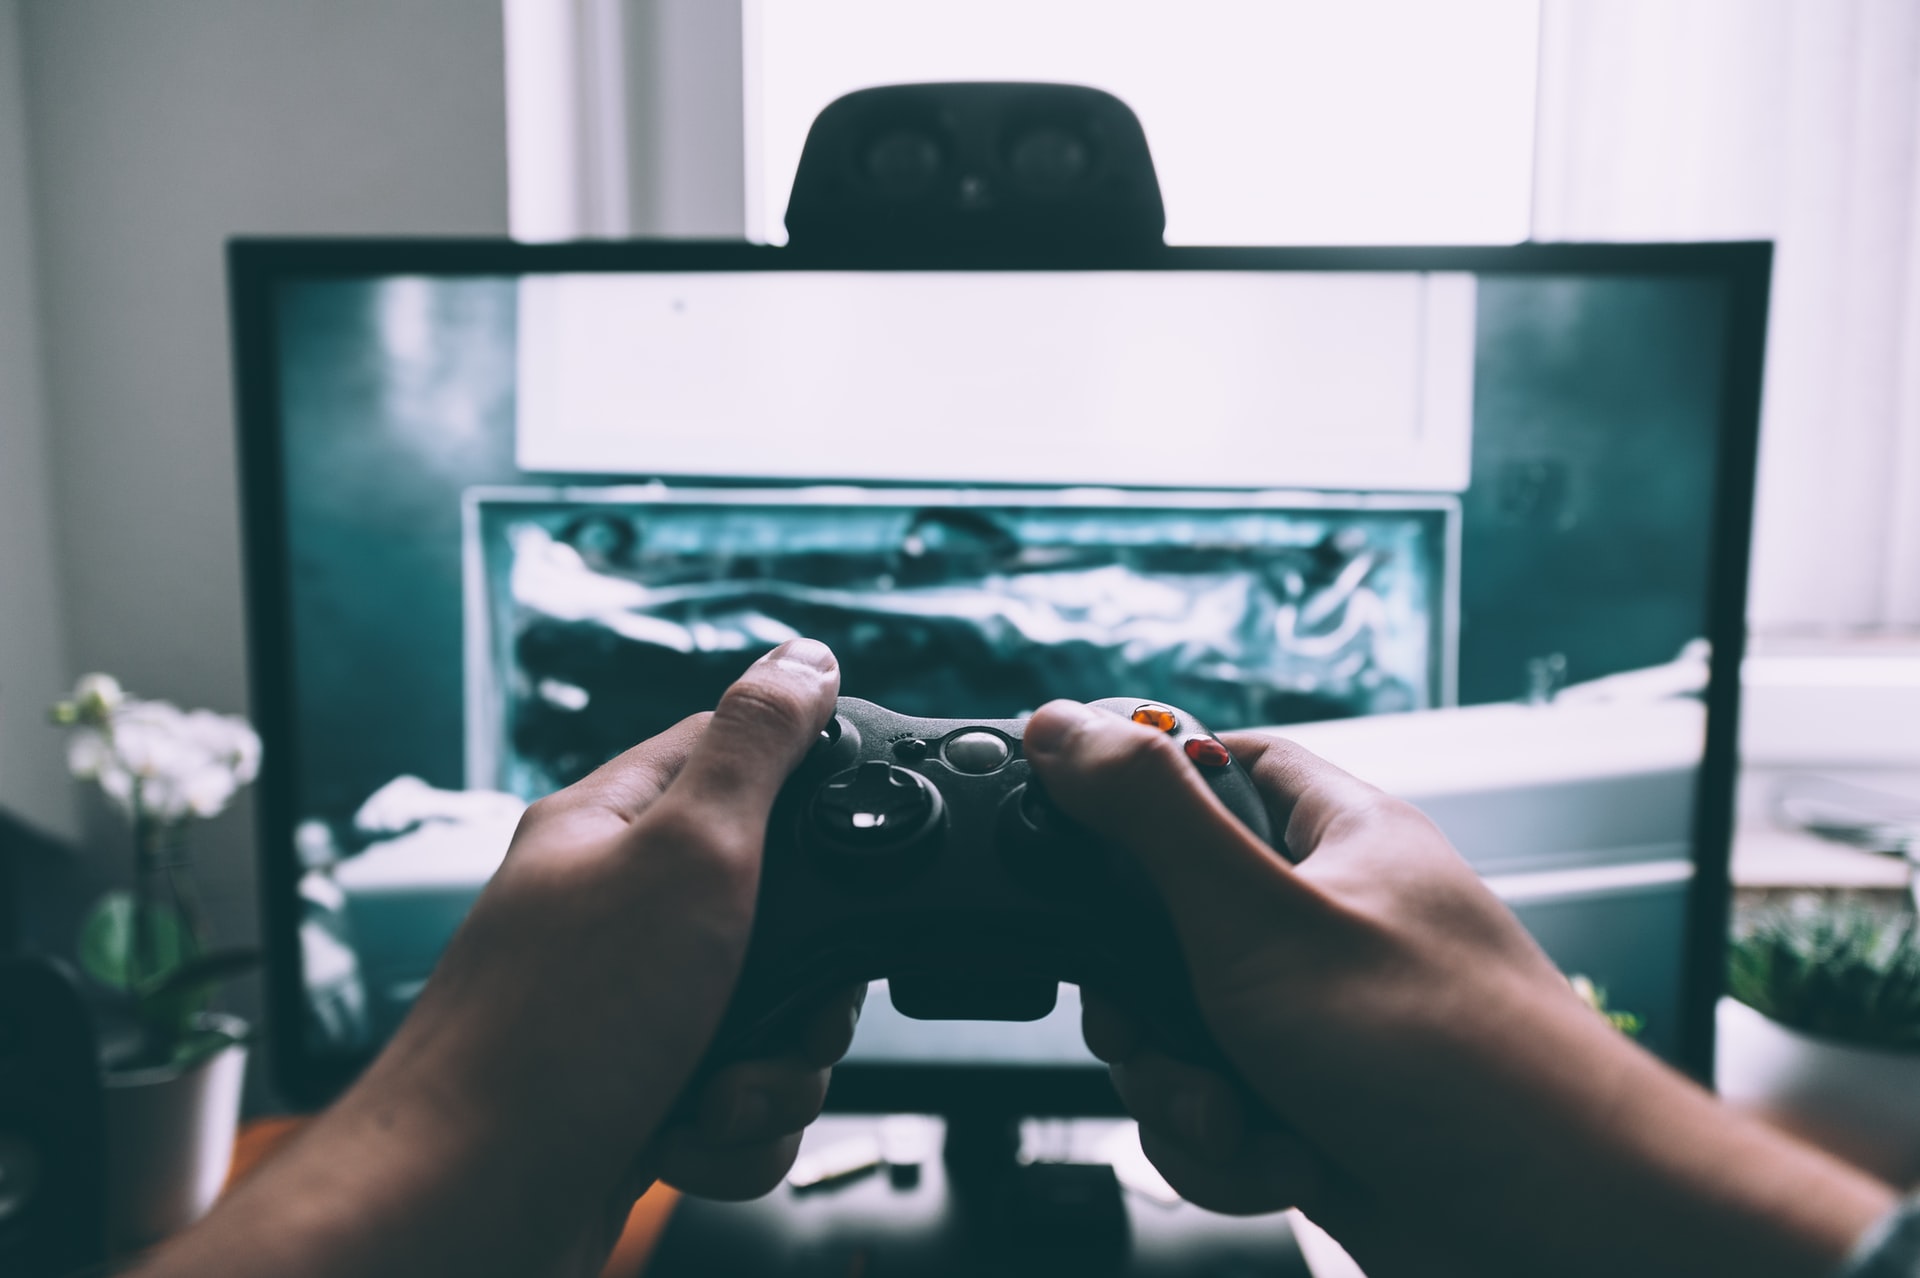 Pornography & Gaming Addictions: Addressing Issues With Your Children, by Joy